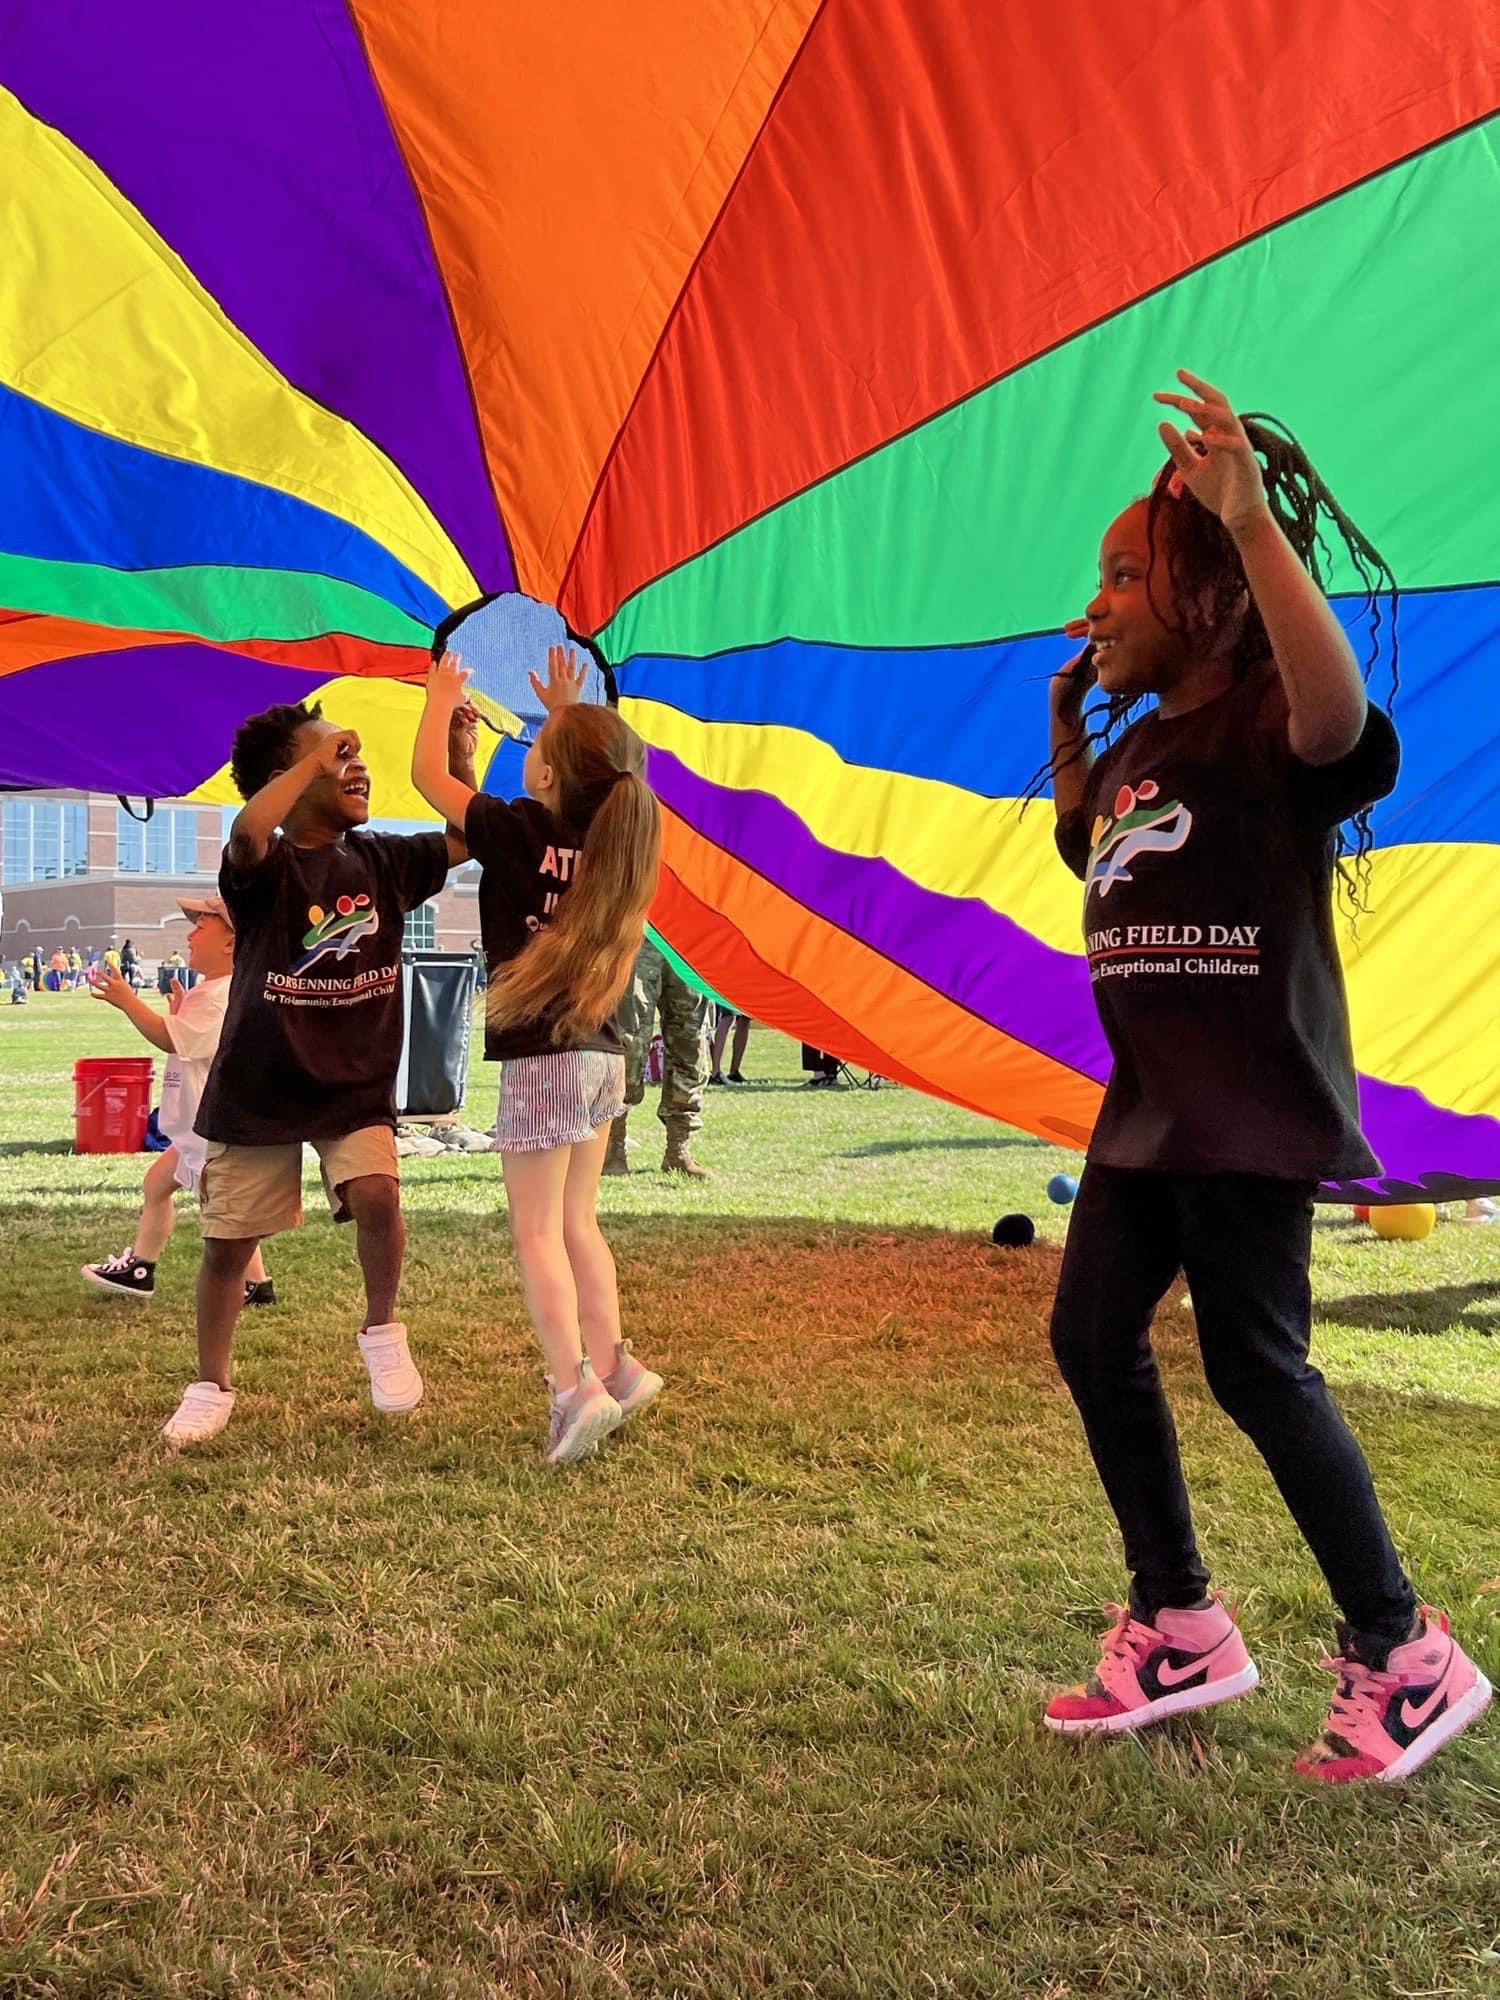 three children playing underneath of colorful parachute